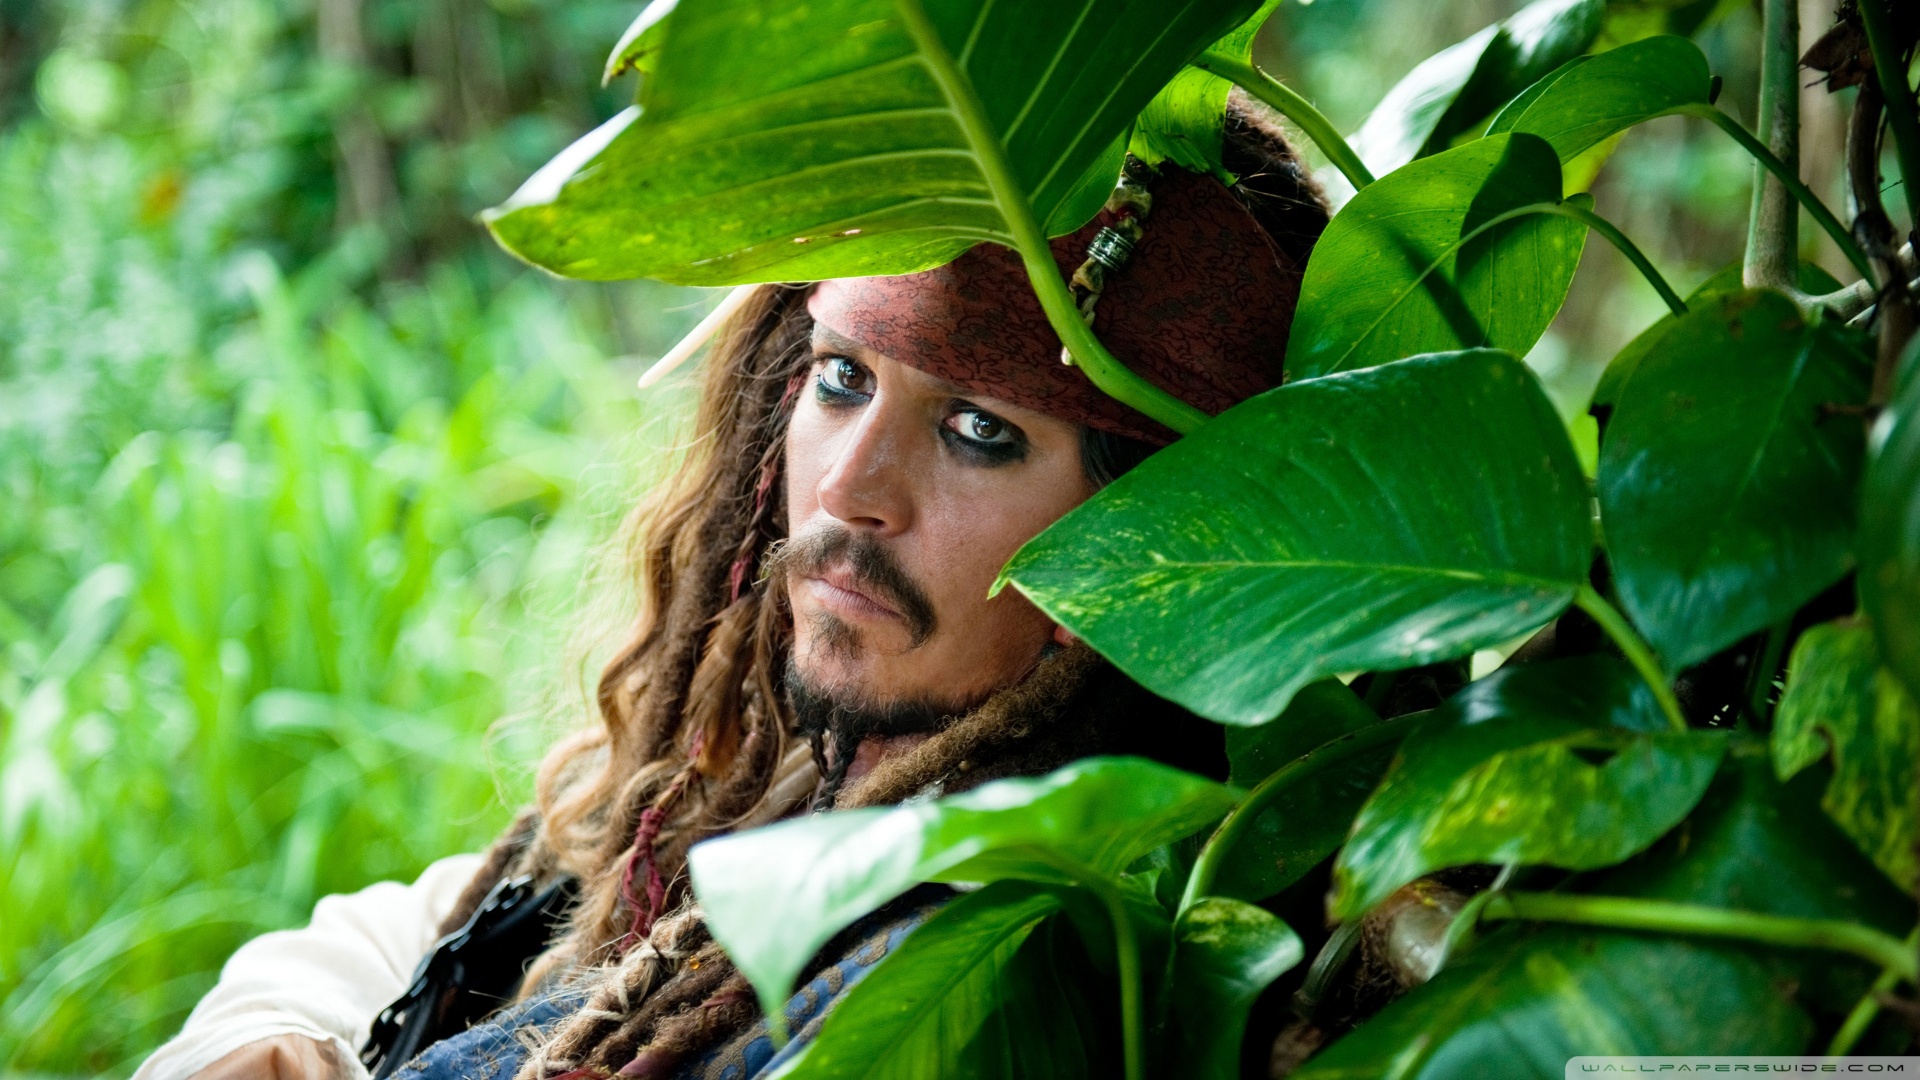  Pirates Of The Caribbean Movie HD Wallpapers HD Wallpapers Depot Pro